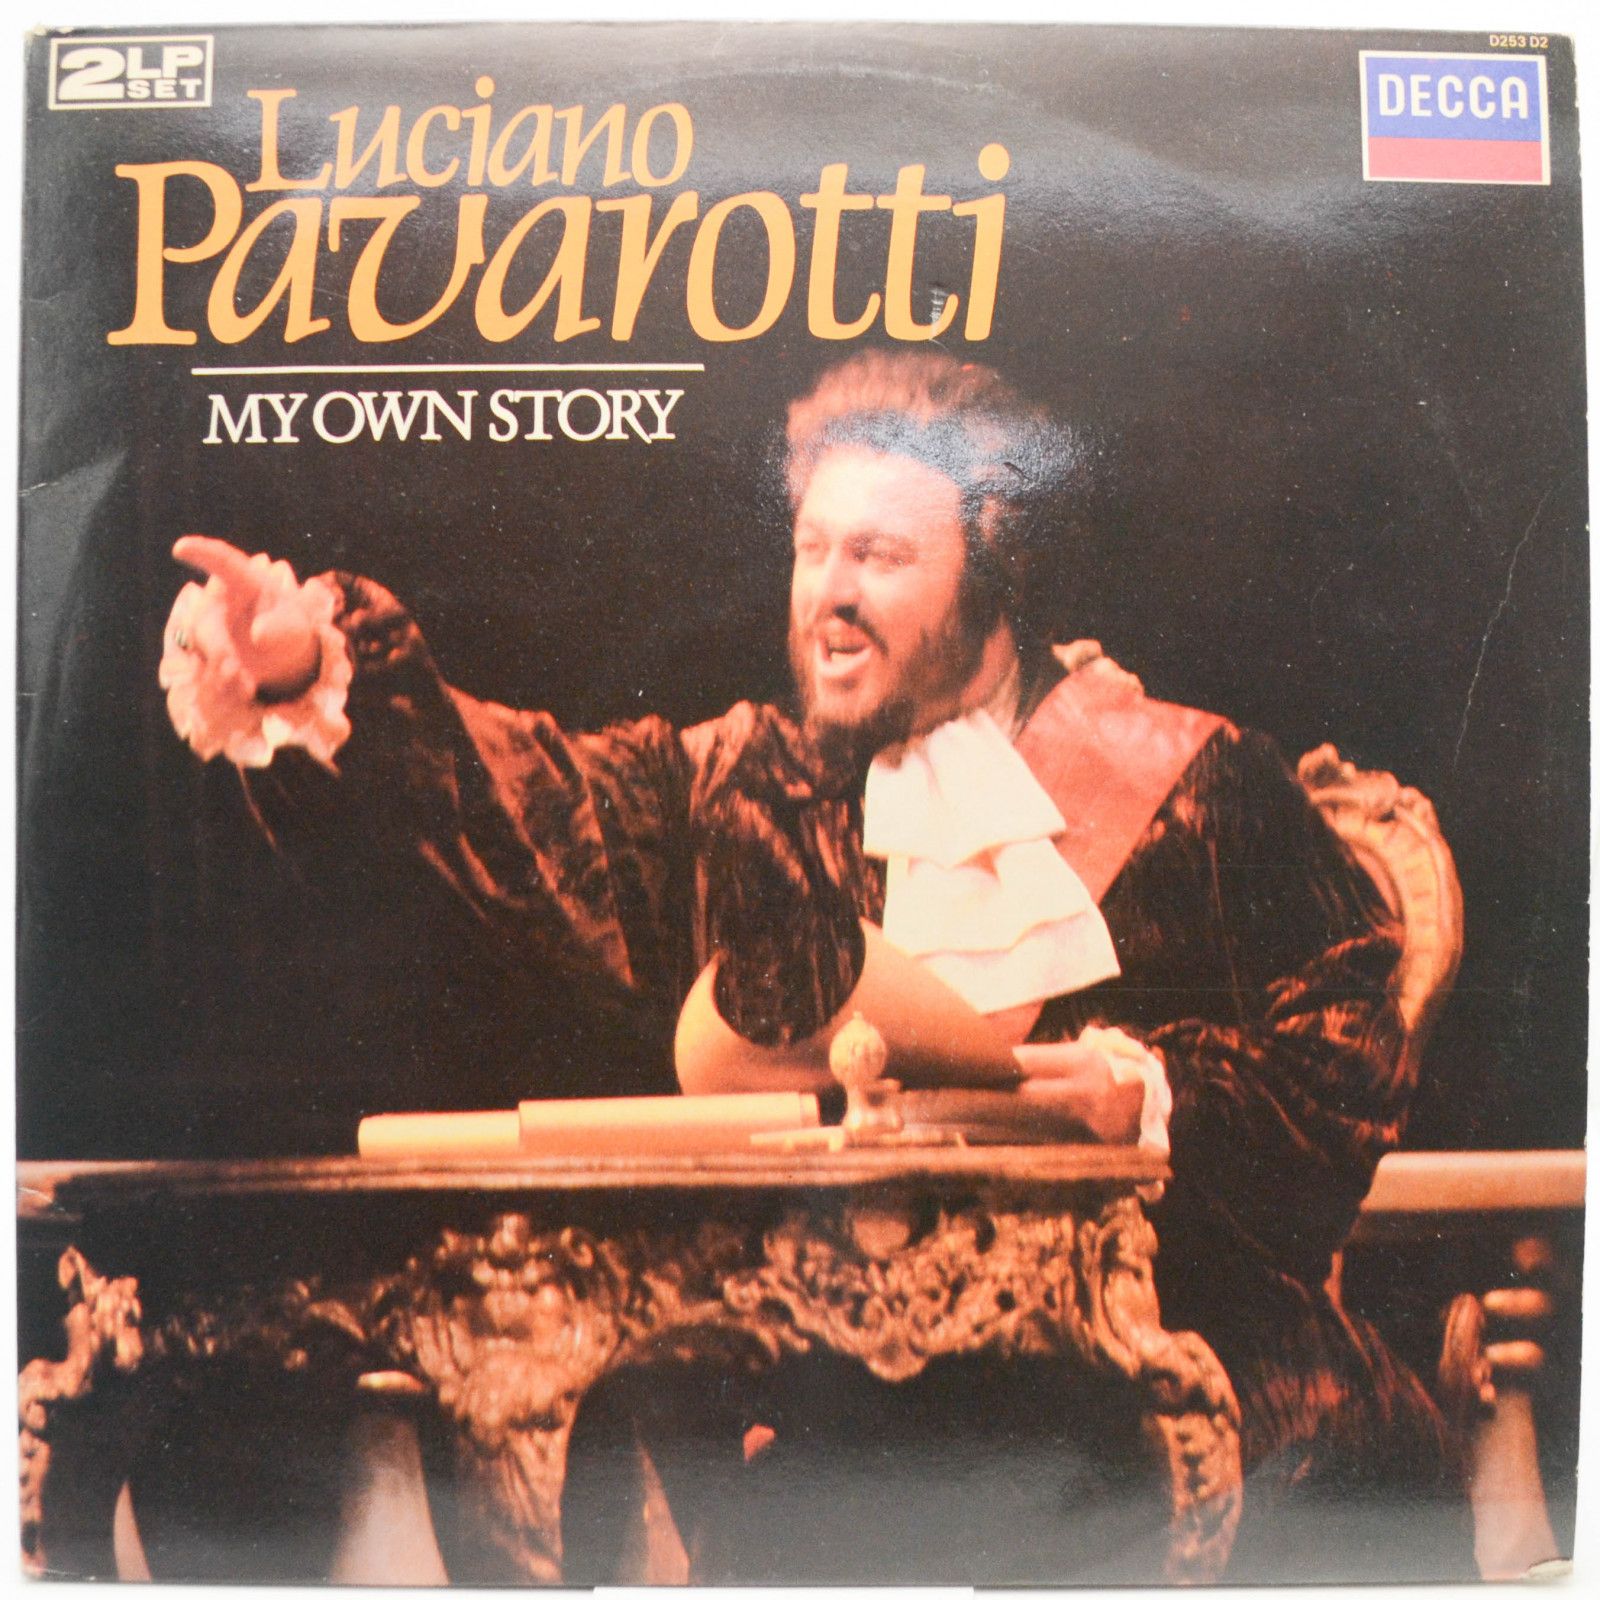 Luciano Pavarotti — My Own Story (2LP, booklet), 1981